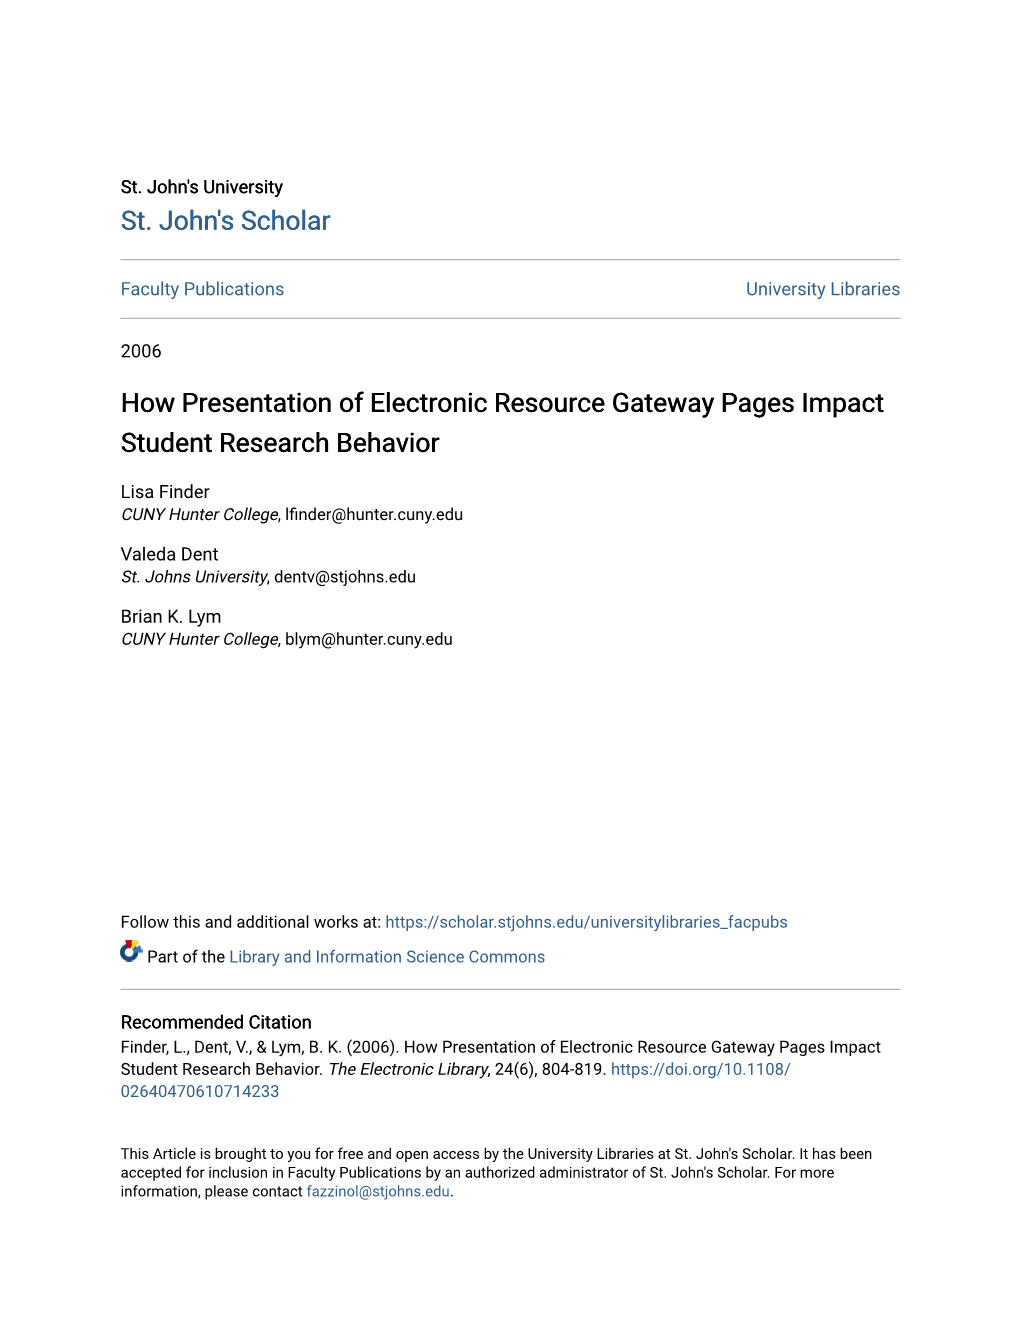 How Presentation of Electronic Resource Gateway Pages Impact Student Research Behavior